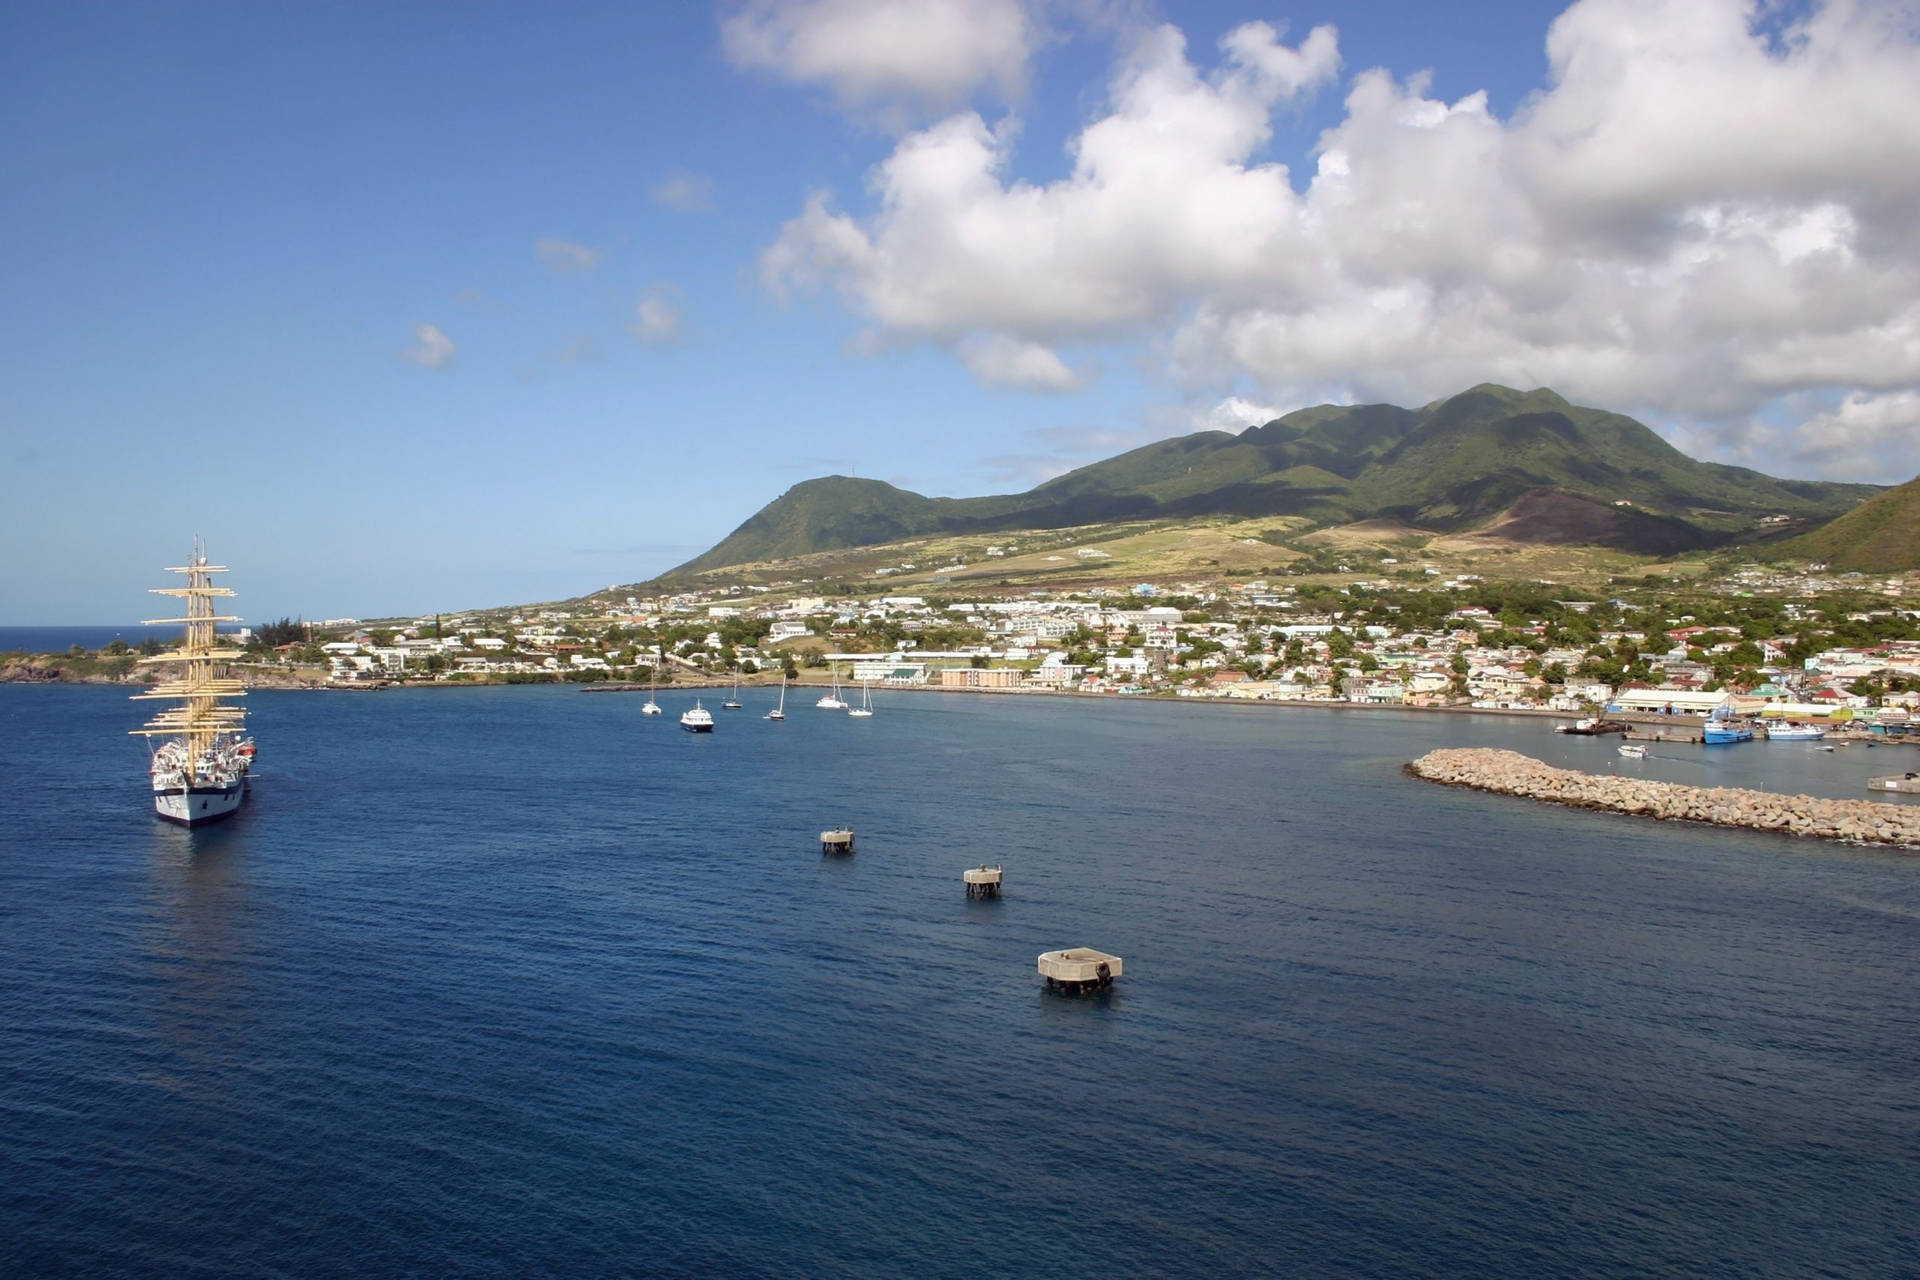 Caption: Scenic Docks and Boats in St. Kitts and Nevis Wallpaper